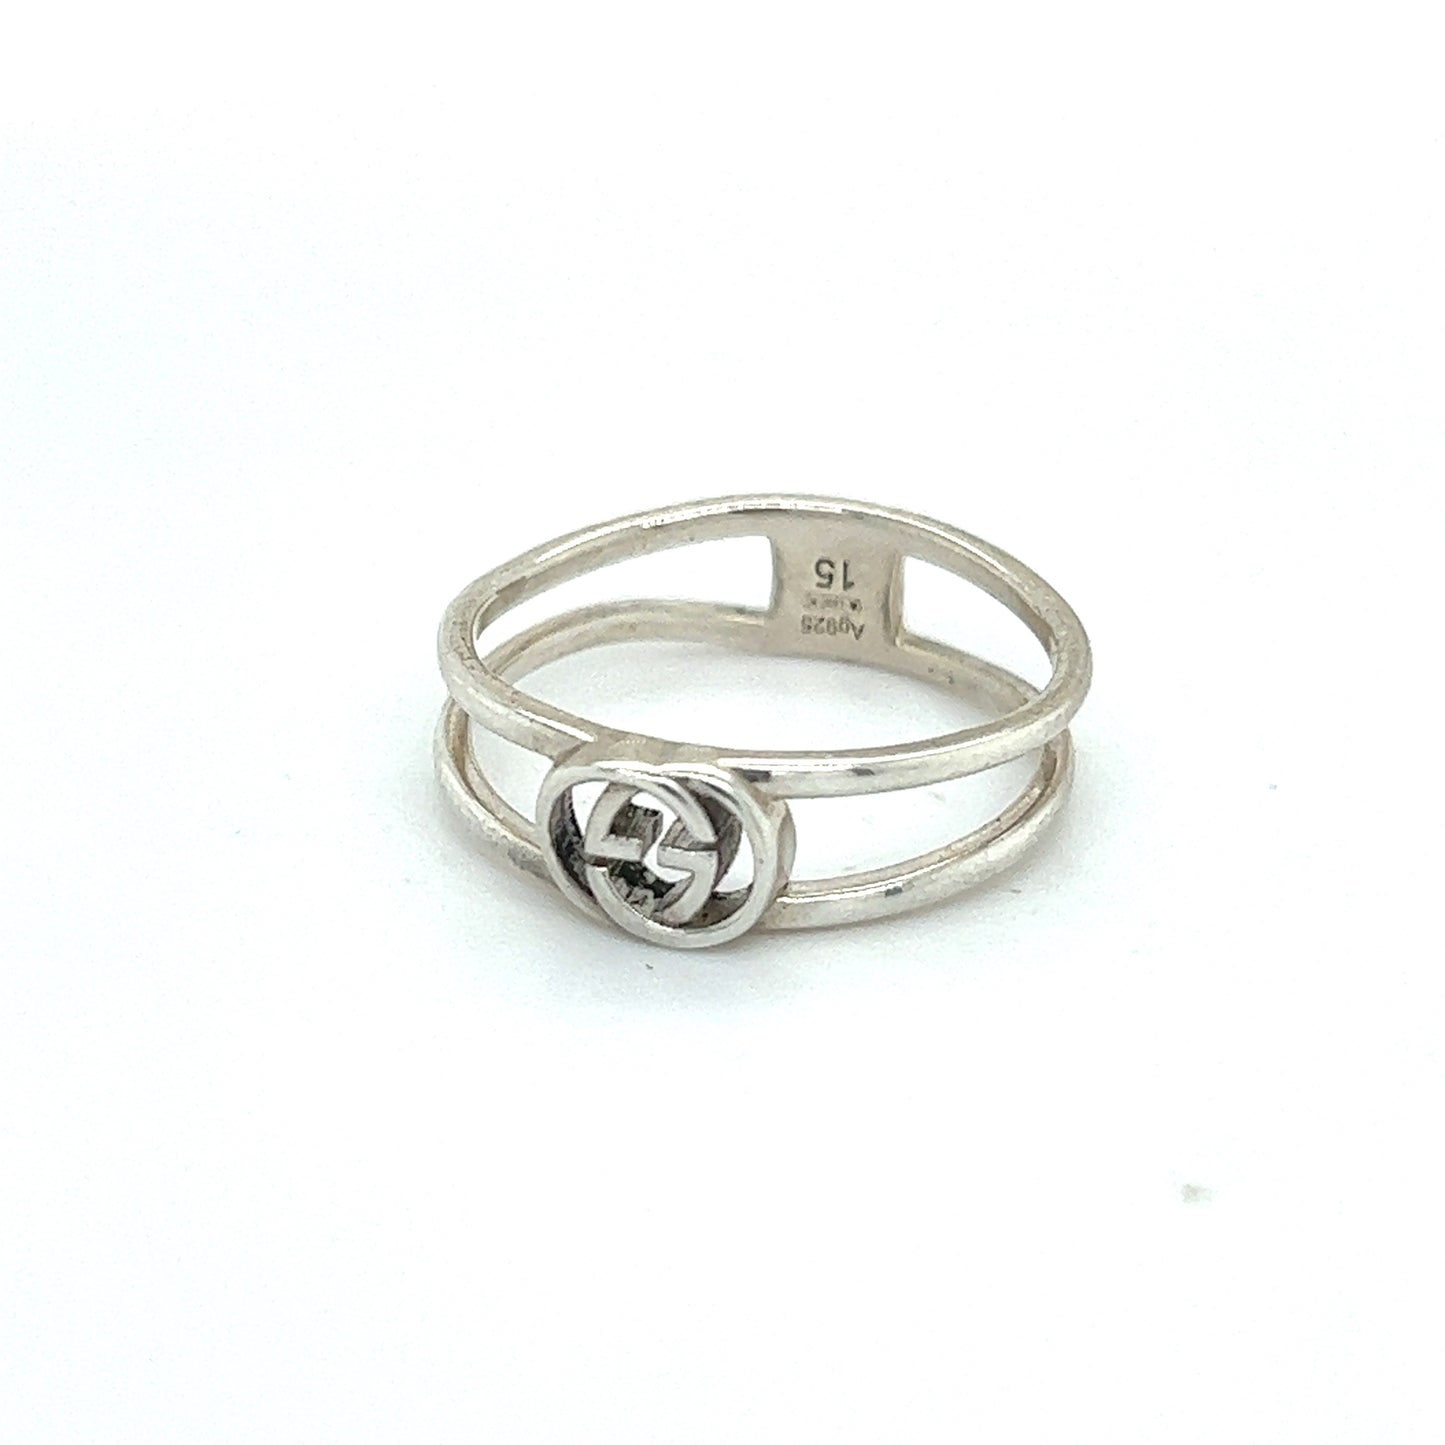 Gucci Estate Ladies Ring Size 7 Sterling Silver G16